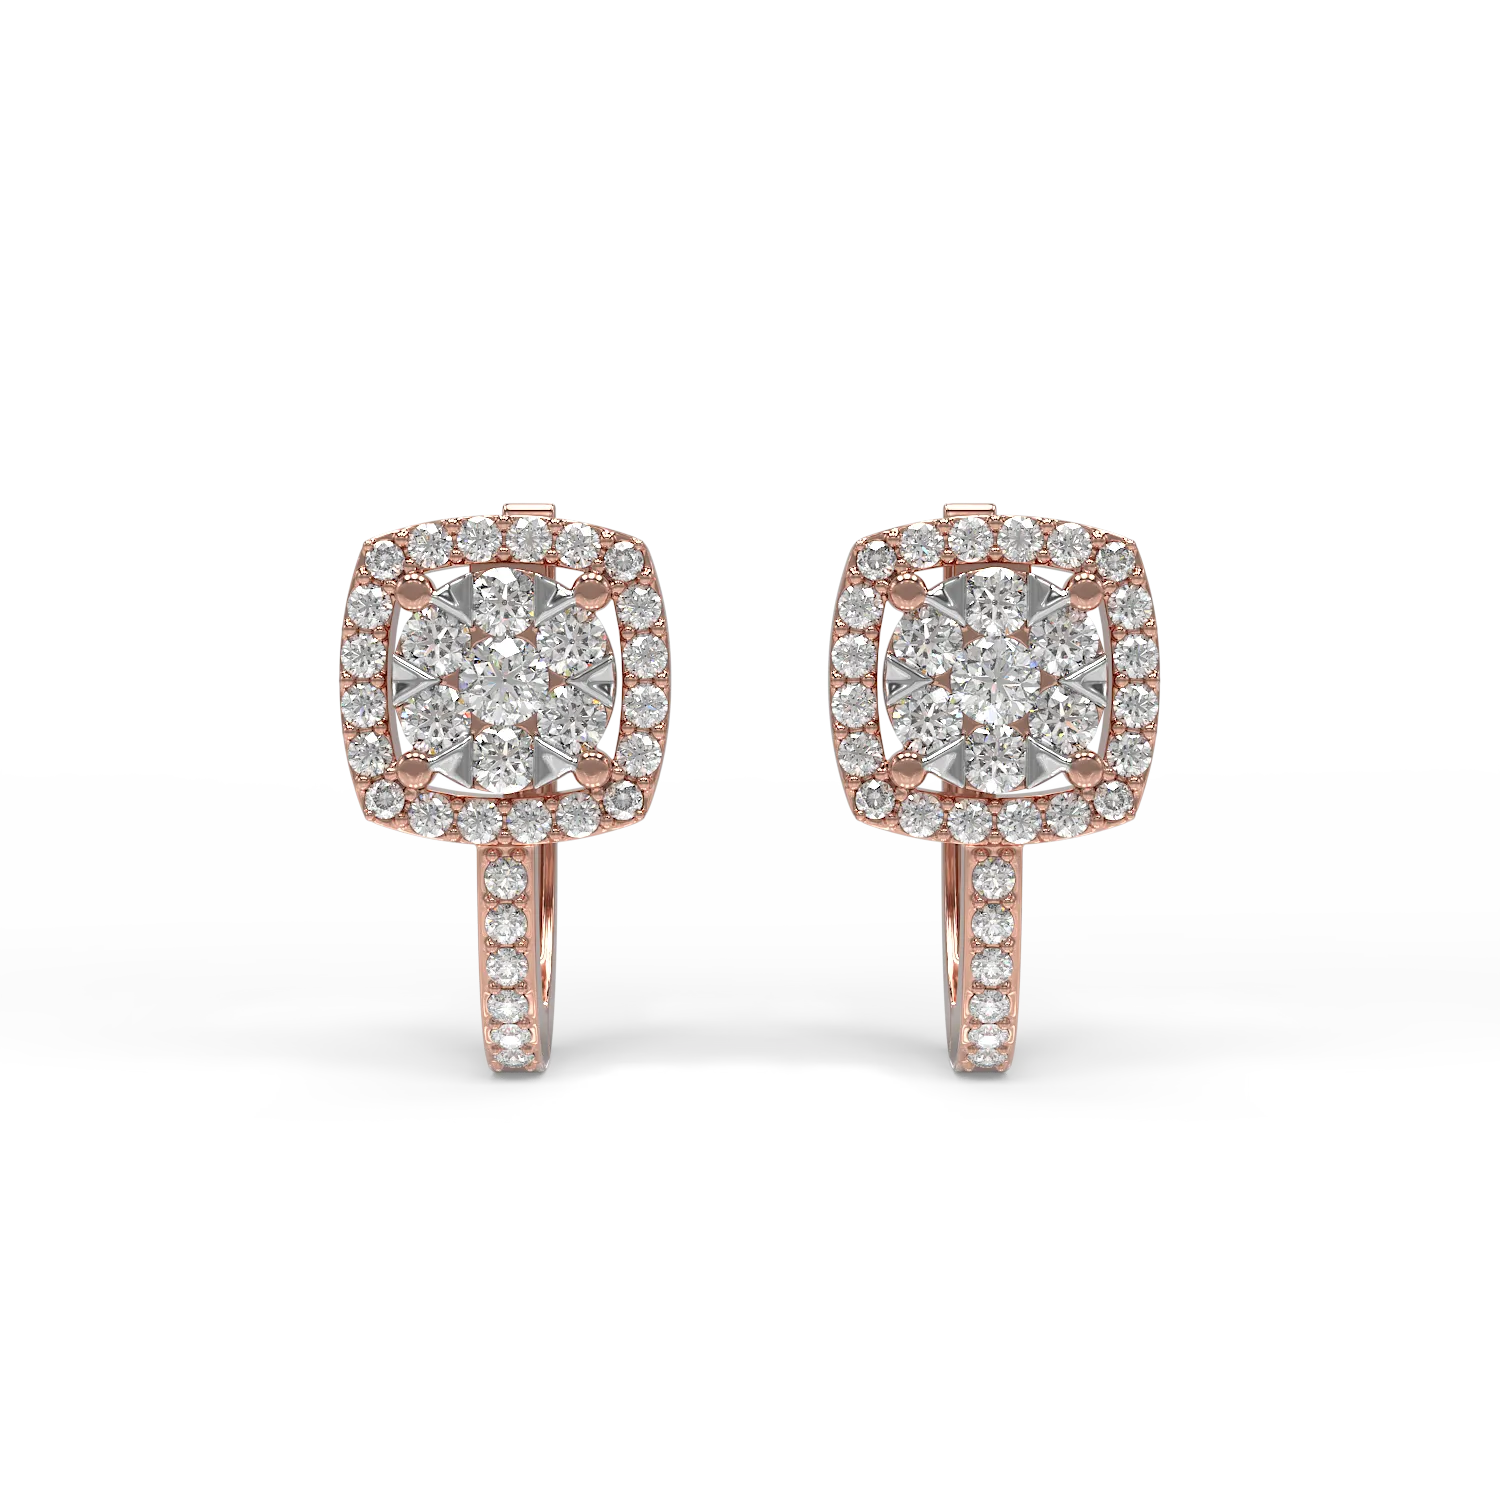 Rose gold earrings with 0.476ct diamonds